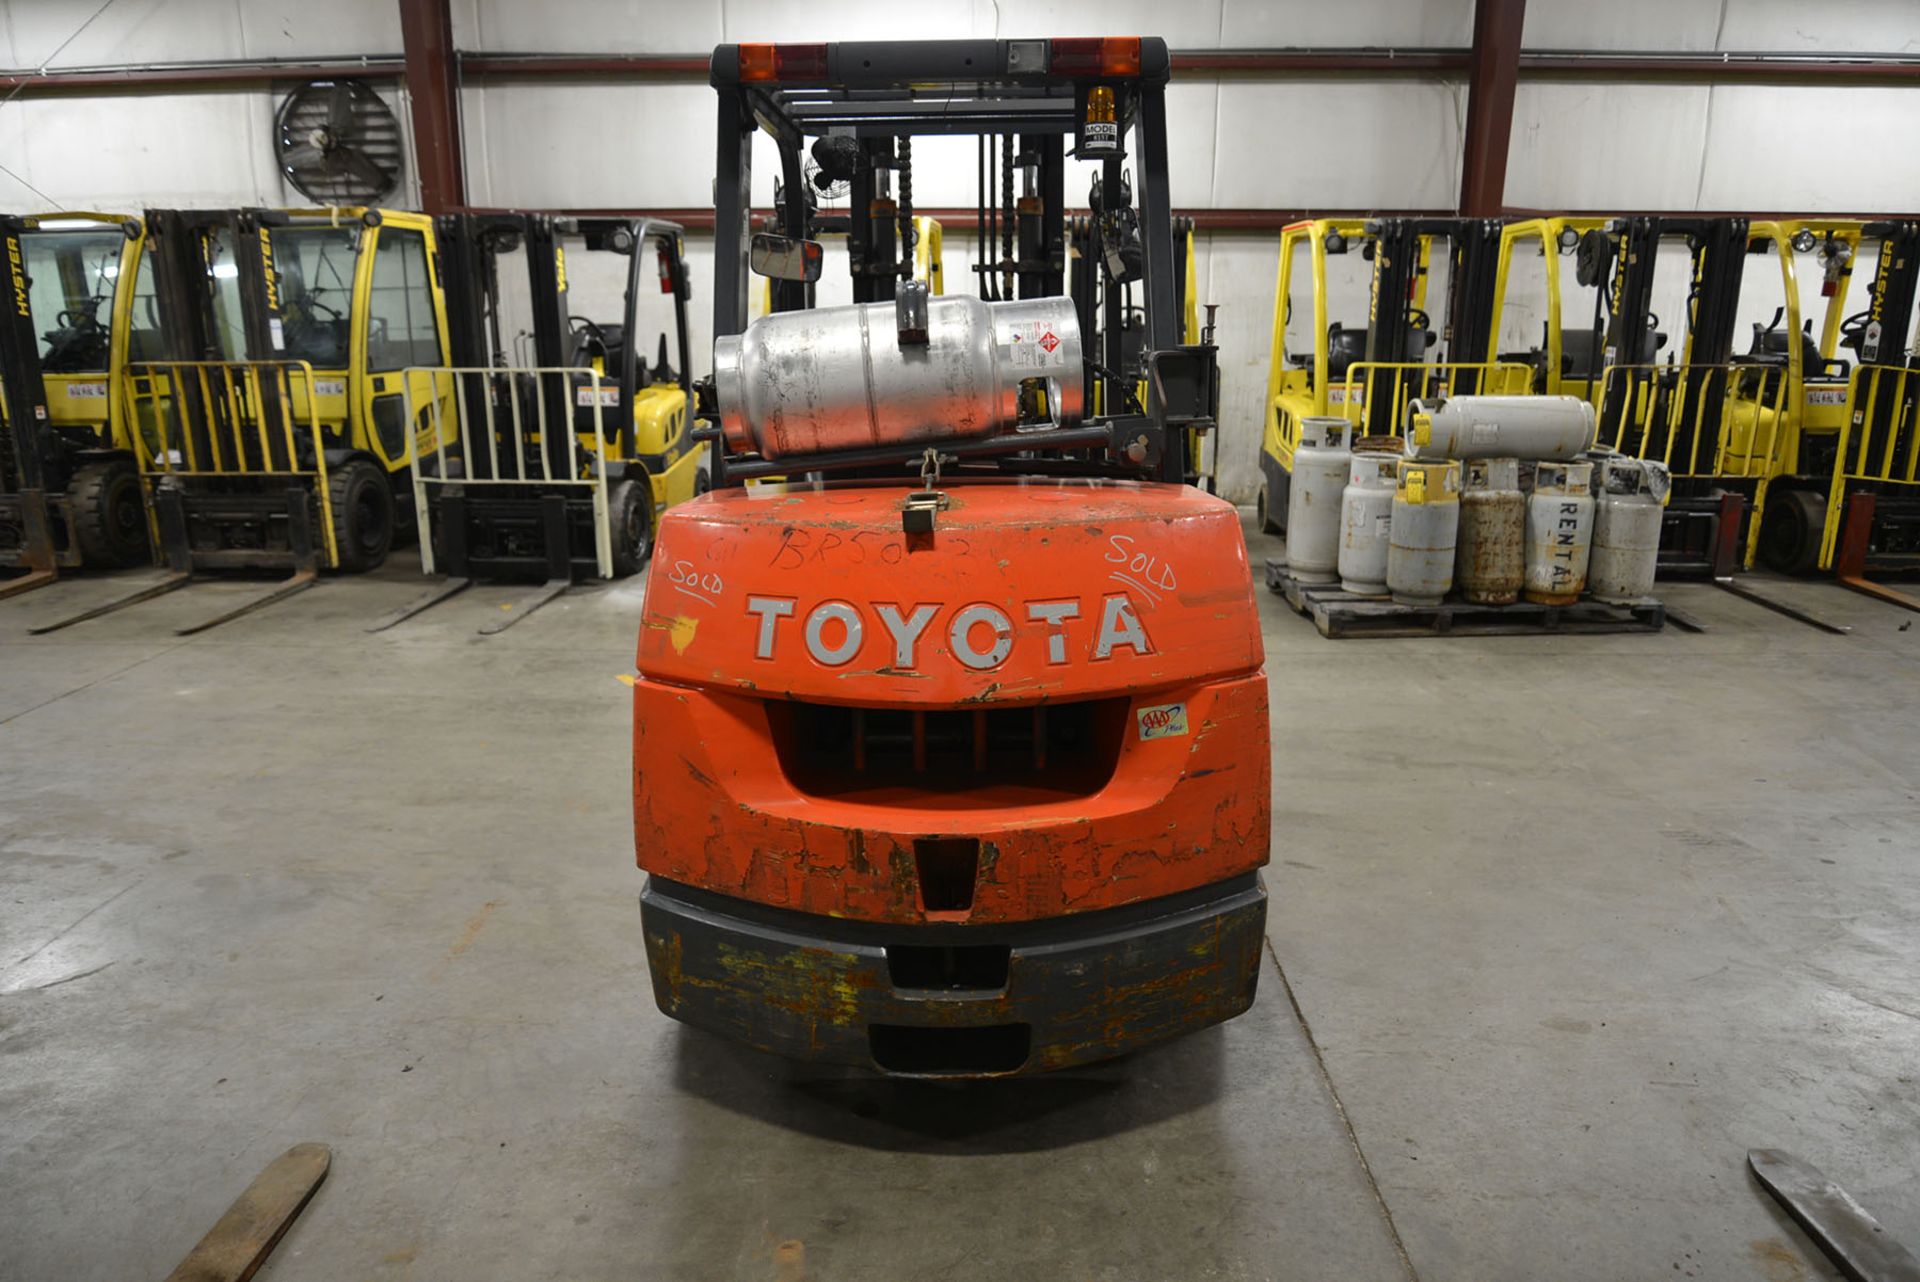 2009 TOYOTA 10,000-LB., MODEL: 7FGCU45, SN: 62076, LPG, SOLID NON-MARKING TIRES, 2-STAGE MAST, 132'' - Image 4 of 7